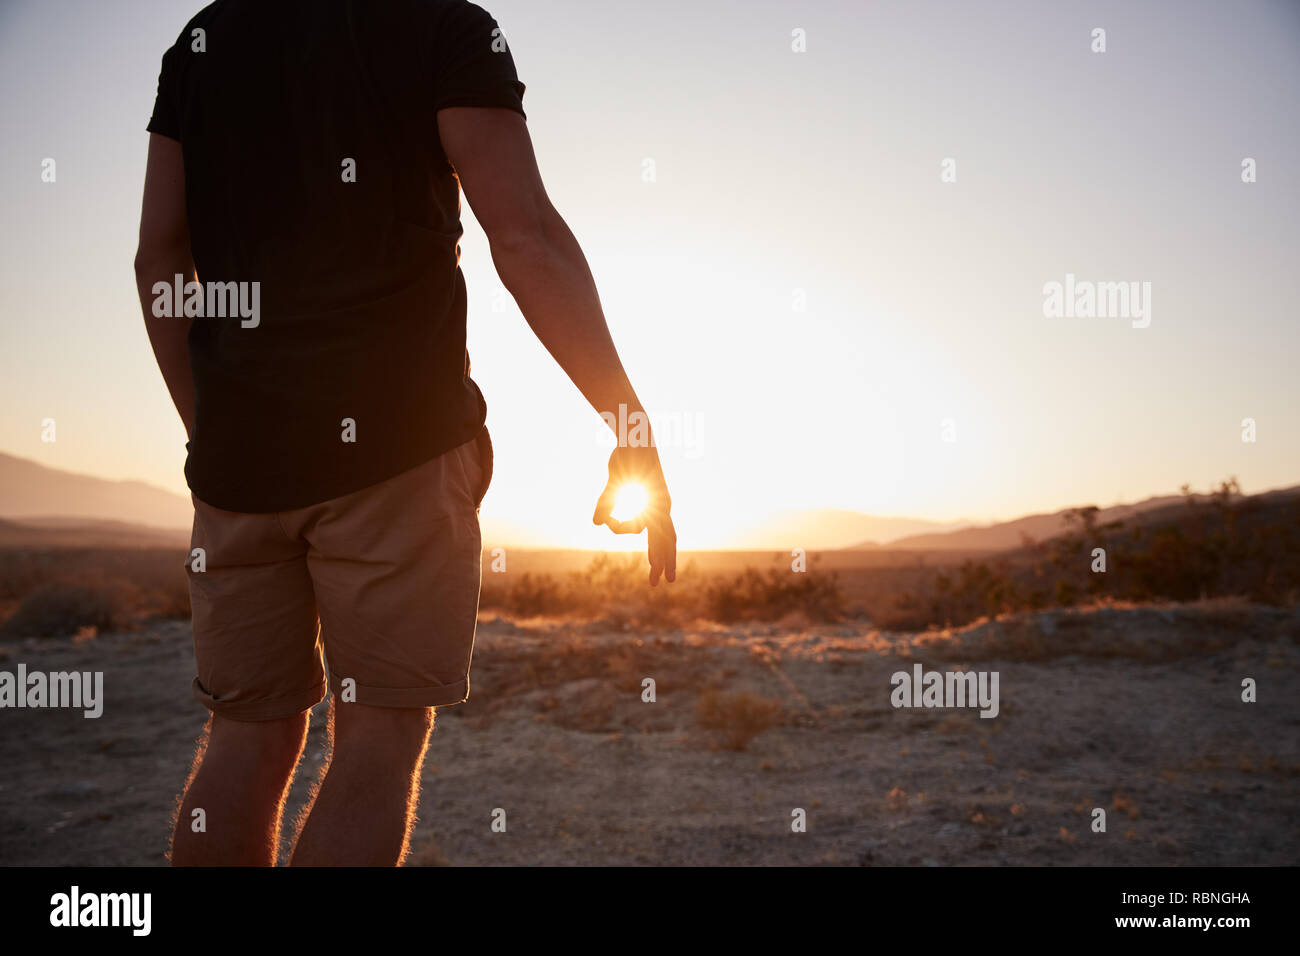 Man in desert circling setting sun with fingers, mid section Stock Photo